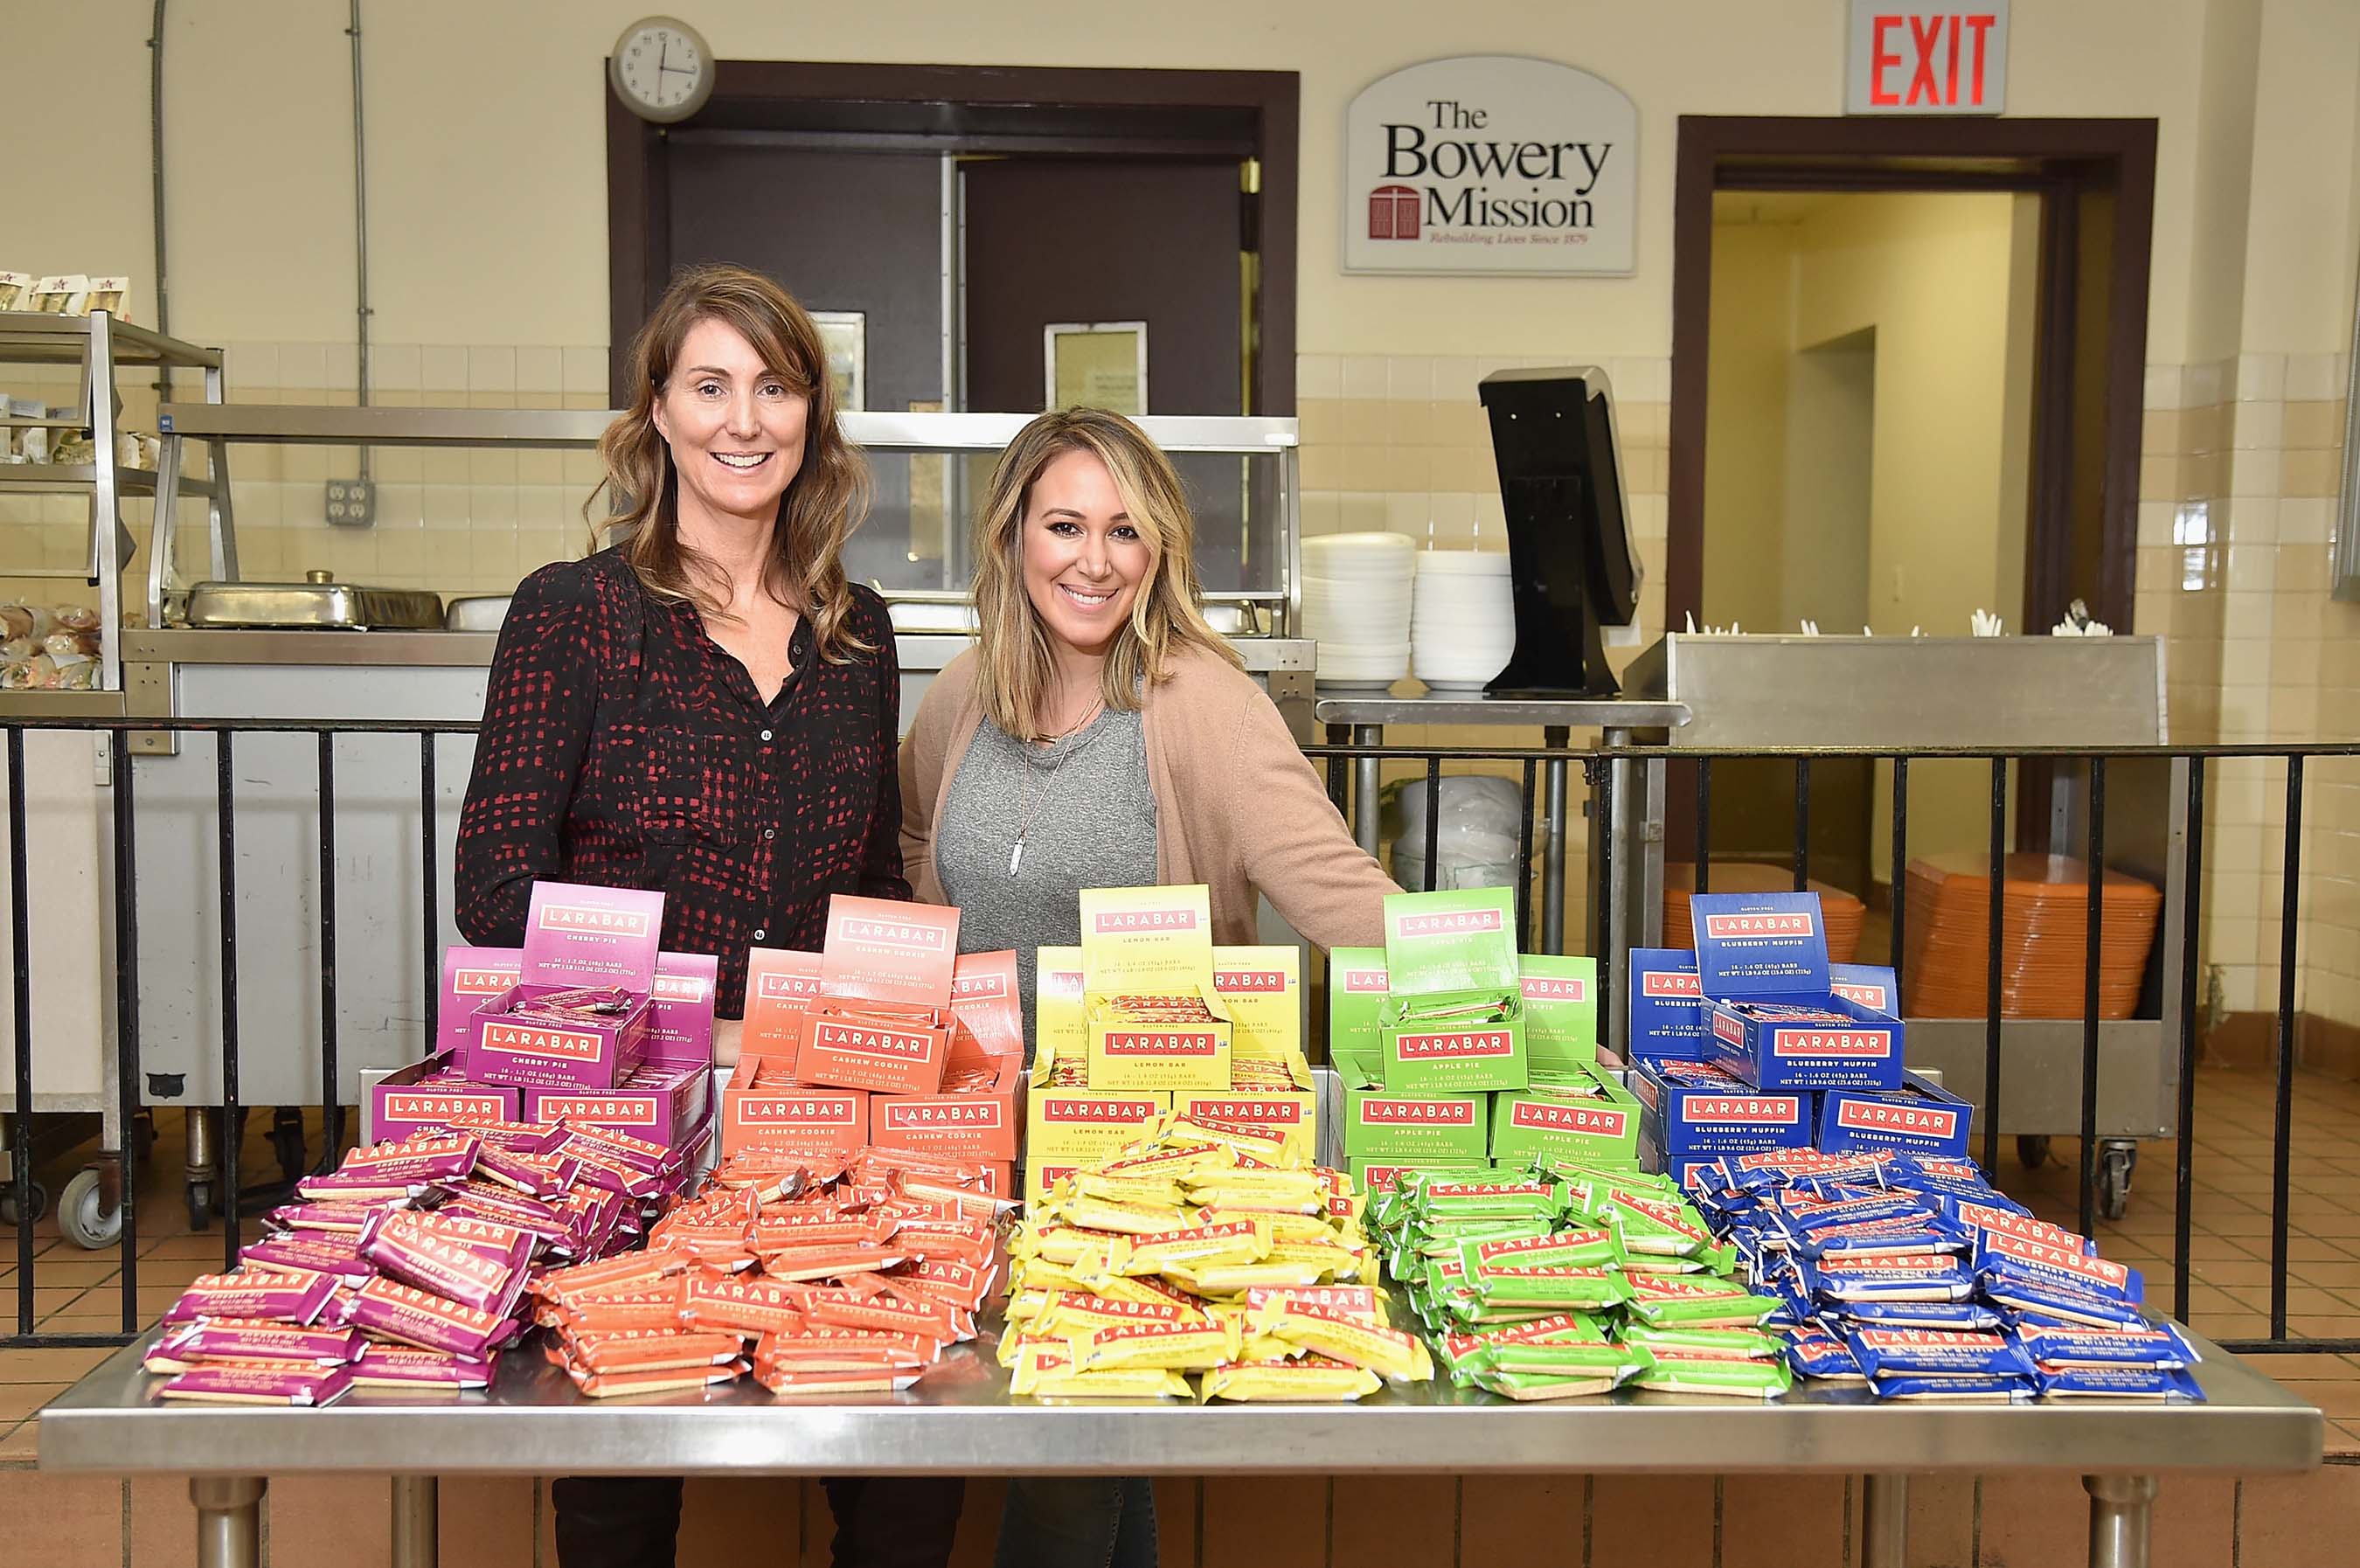 Larabar founder, Lara Merriken (L) and actress Haylie Duff share real food with The Bowery Mission beneficiaries in New York City on January 26, 2016 (Photo by Michael Loccisano/Getty Images for Larabar)